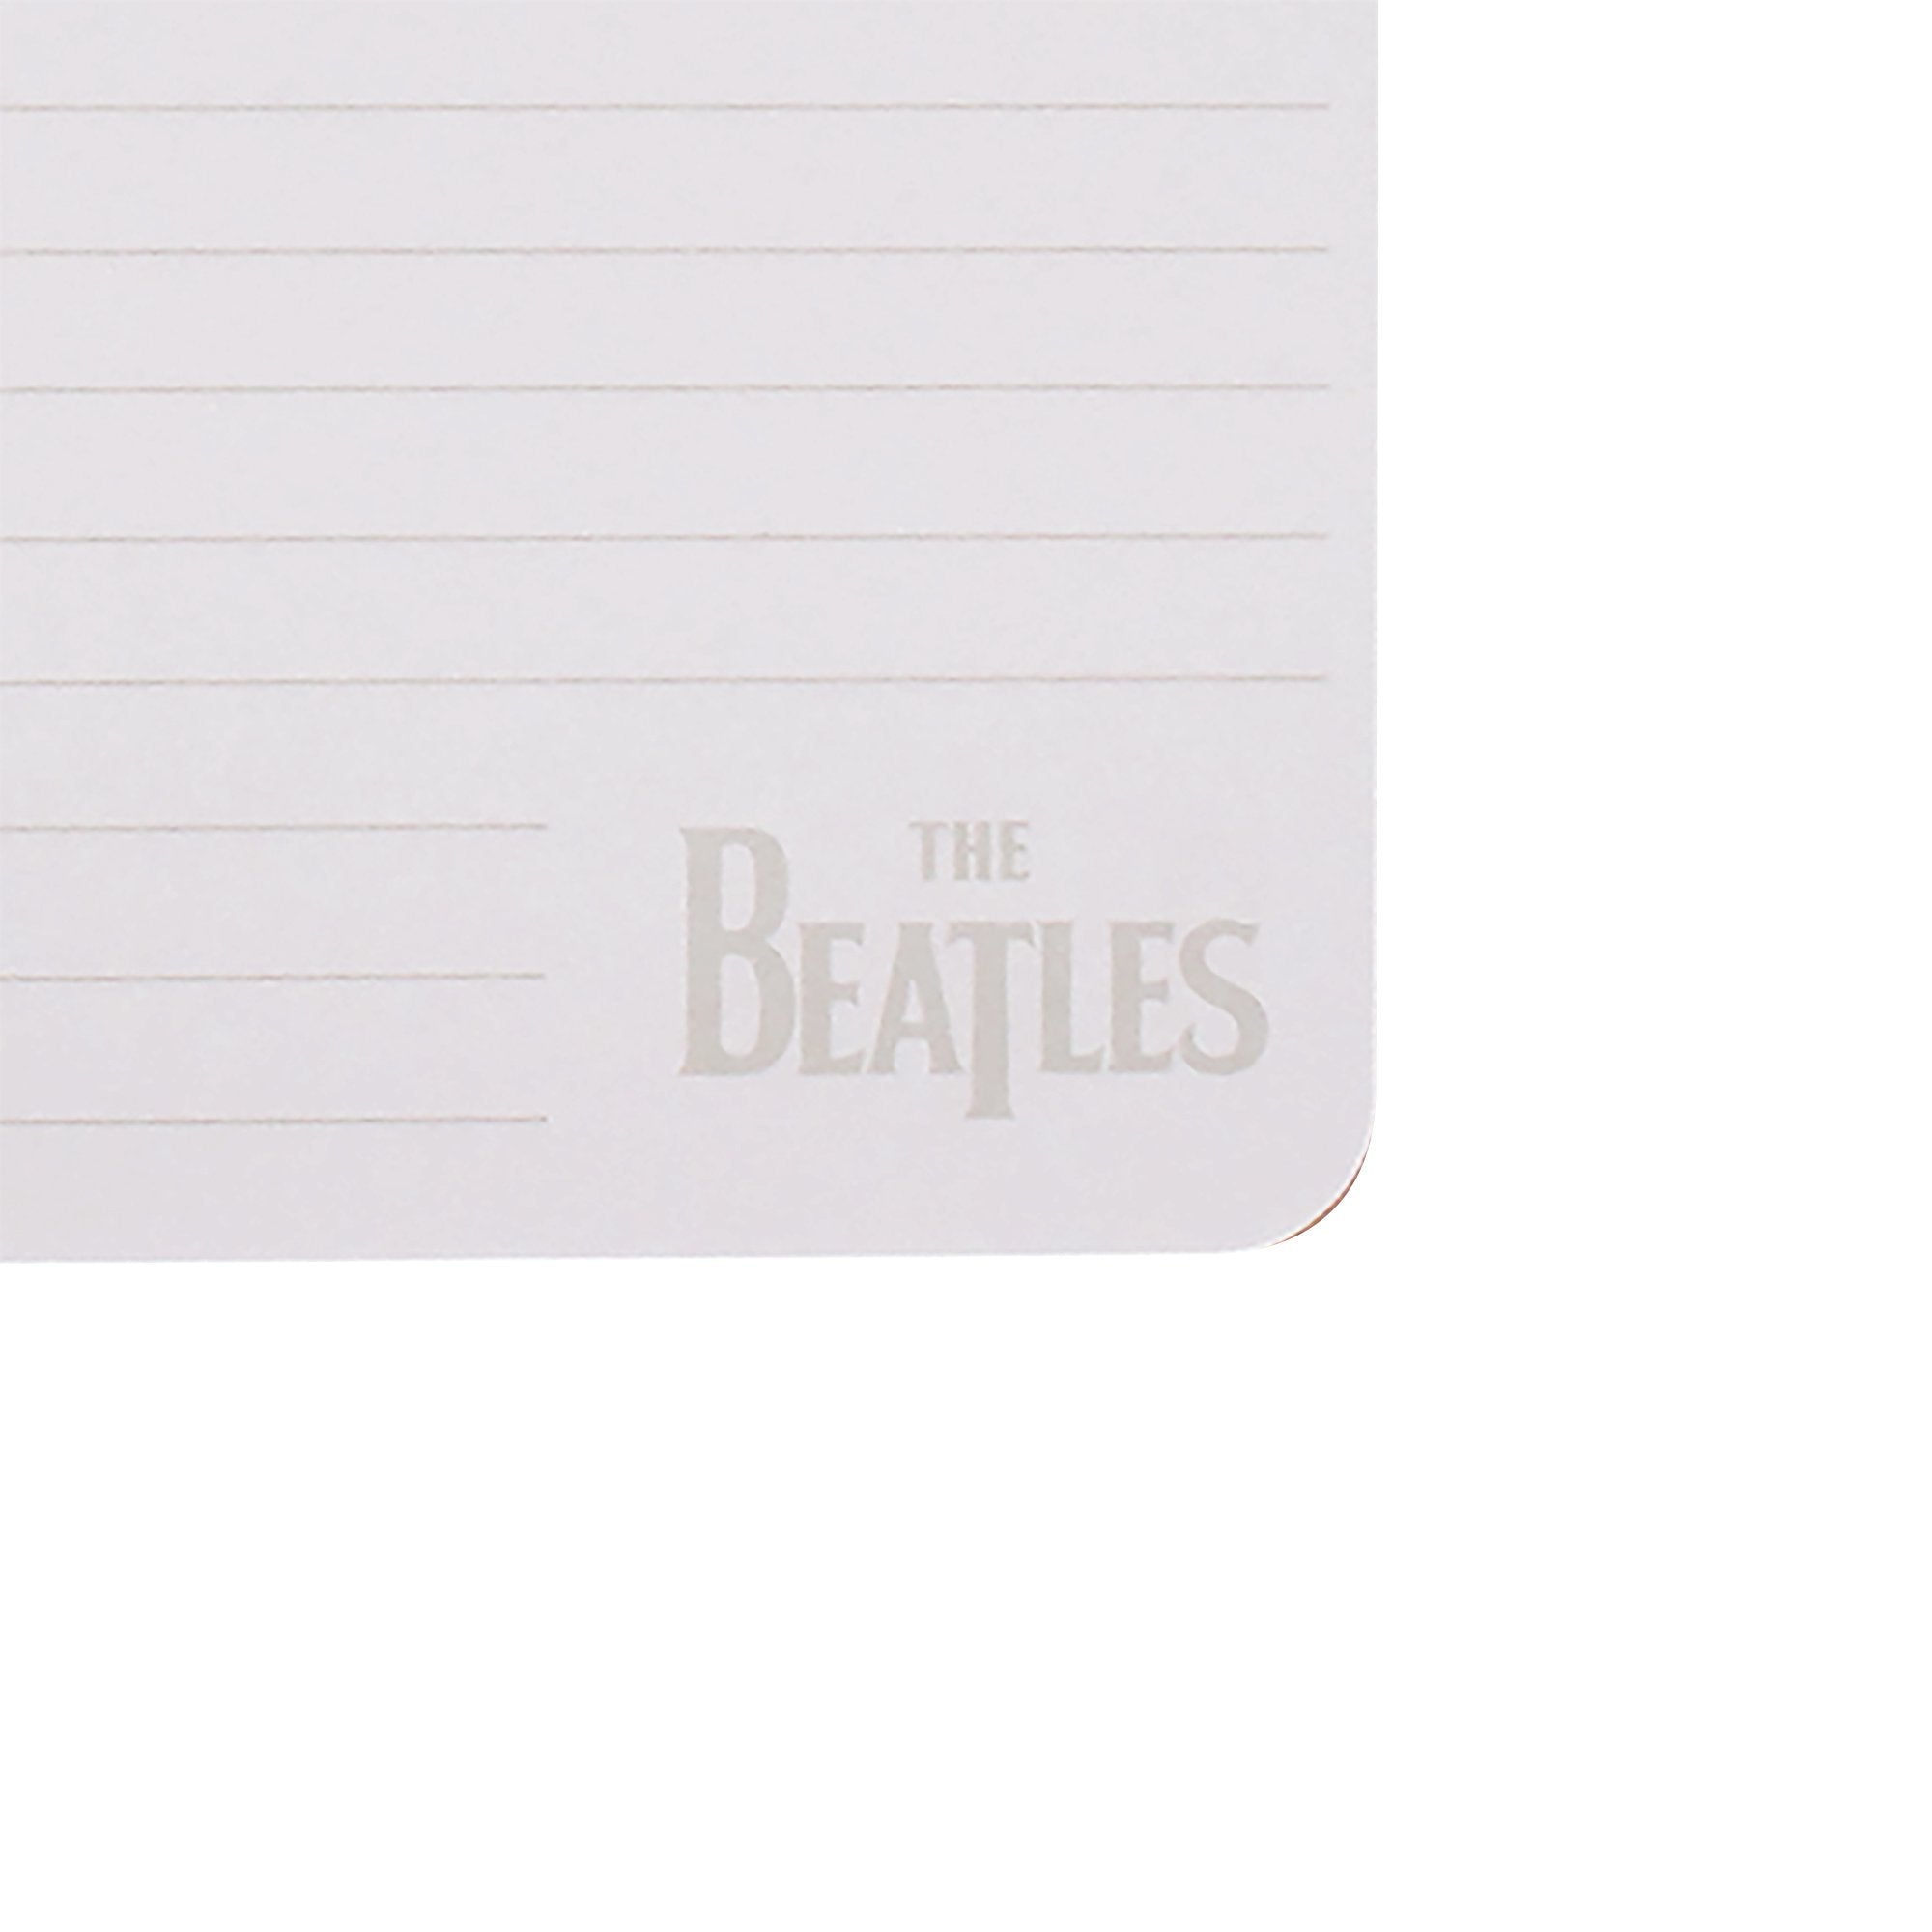 A5 Notebook (Softcover) - The Beatles (Sgt. Pepper)